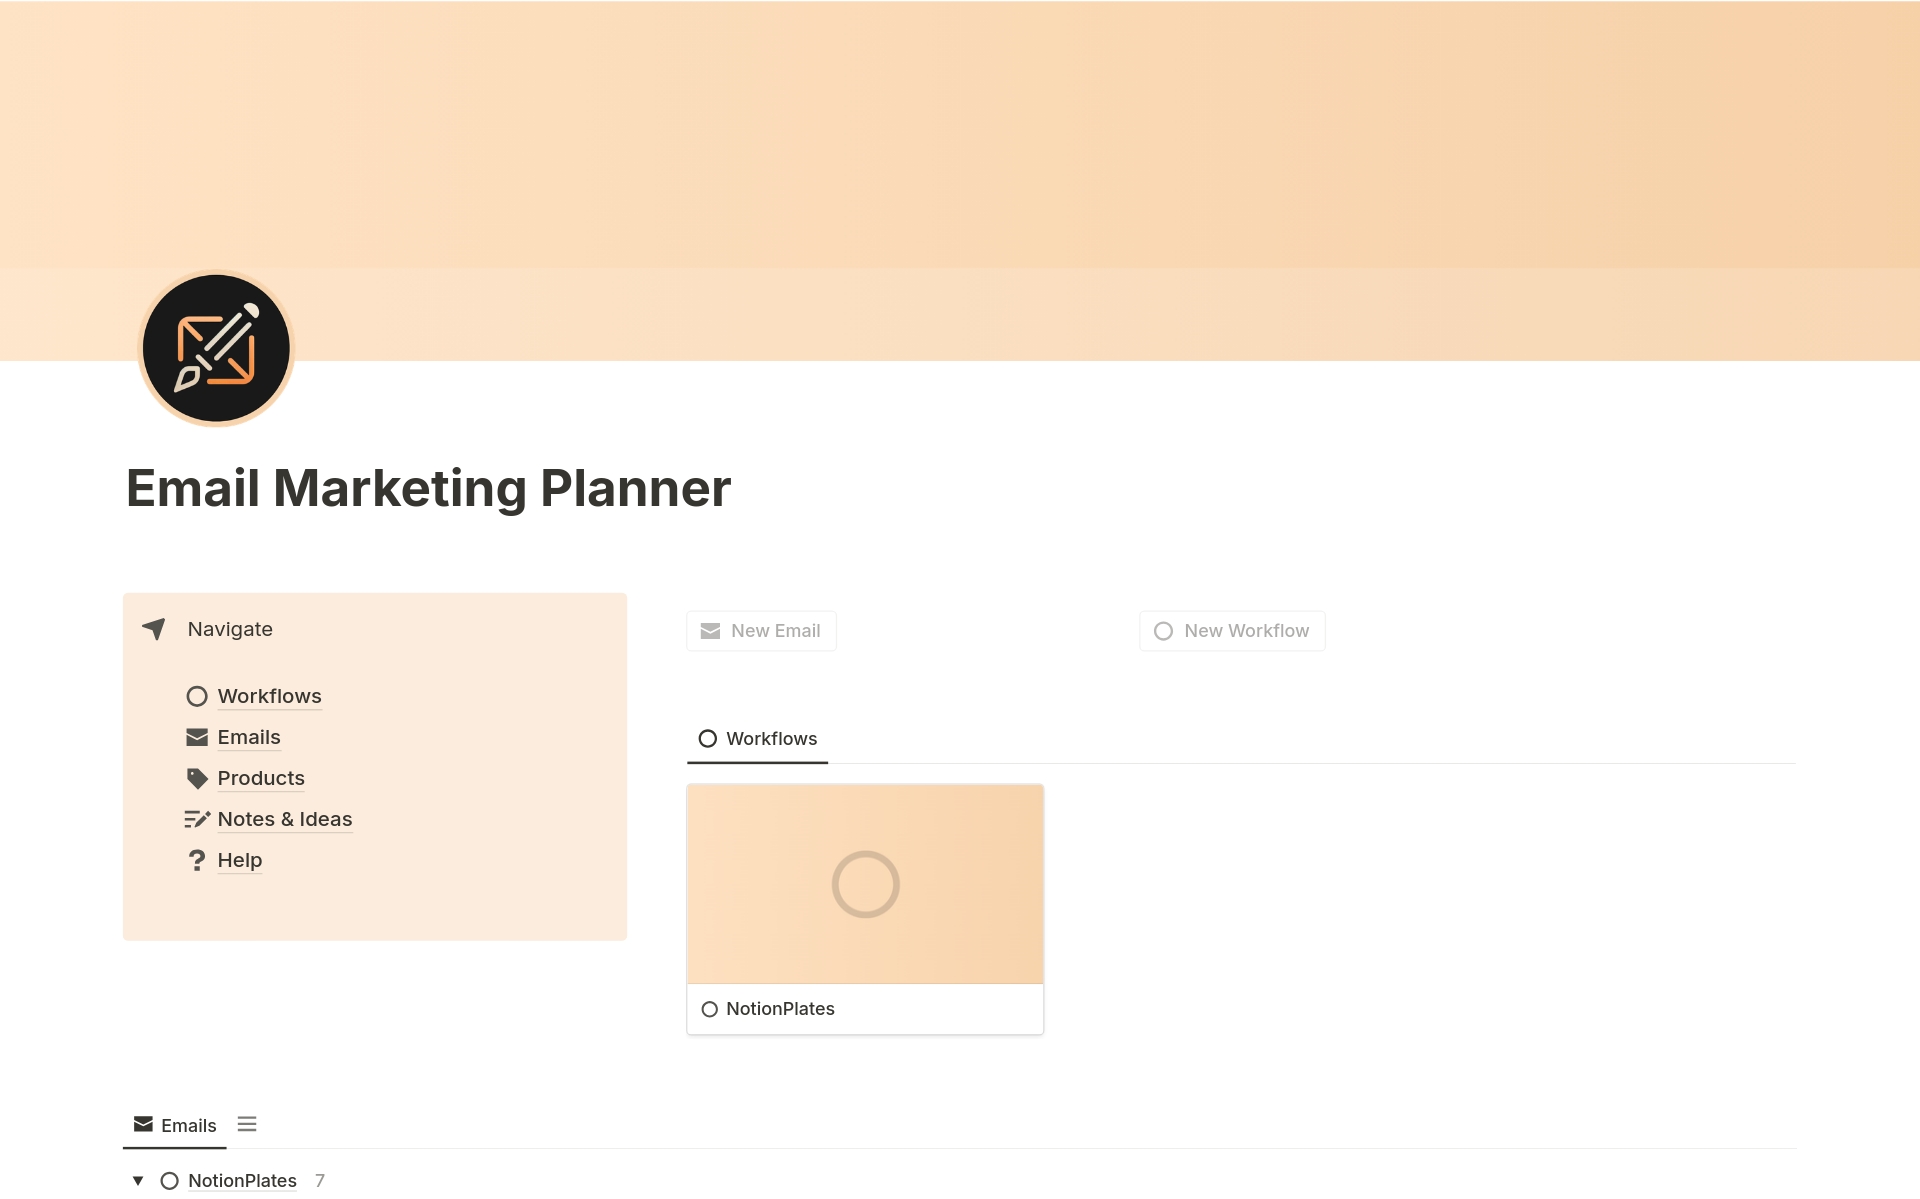 Welcome to the Email Marketing Planner For Notion, a Notion template designed for organizing your workflows, emails, and products.